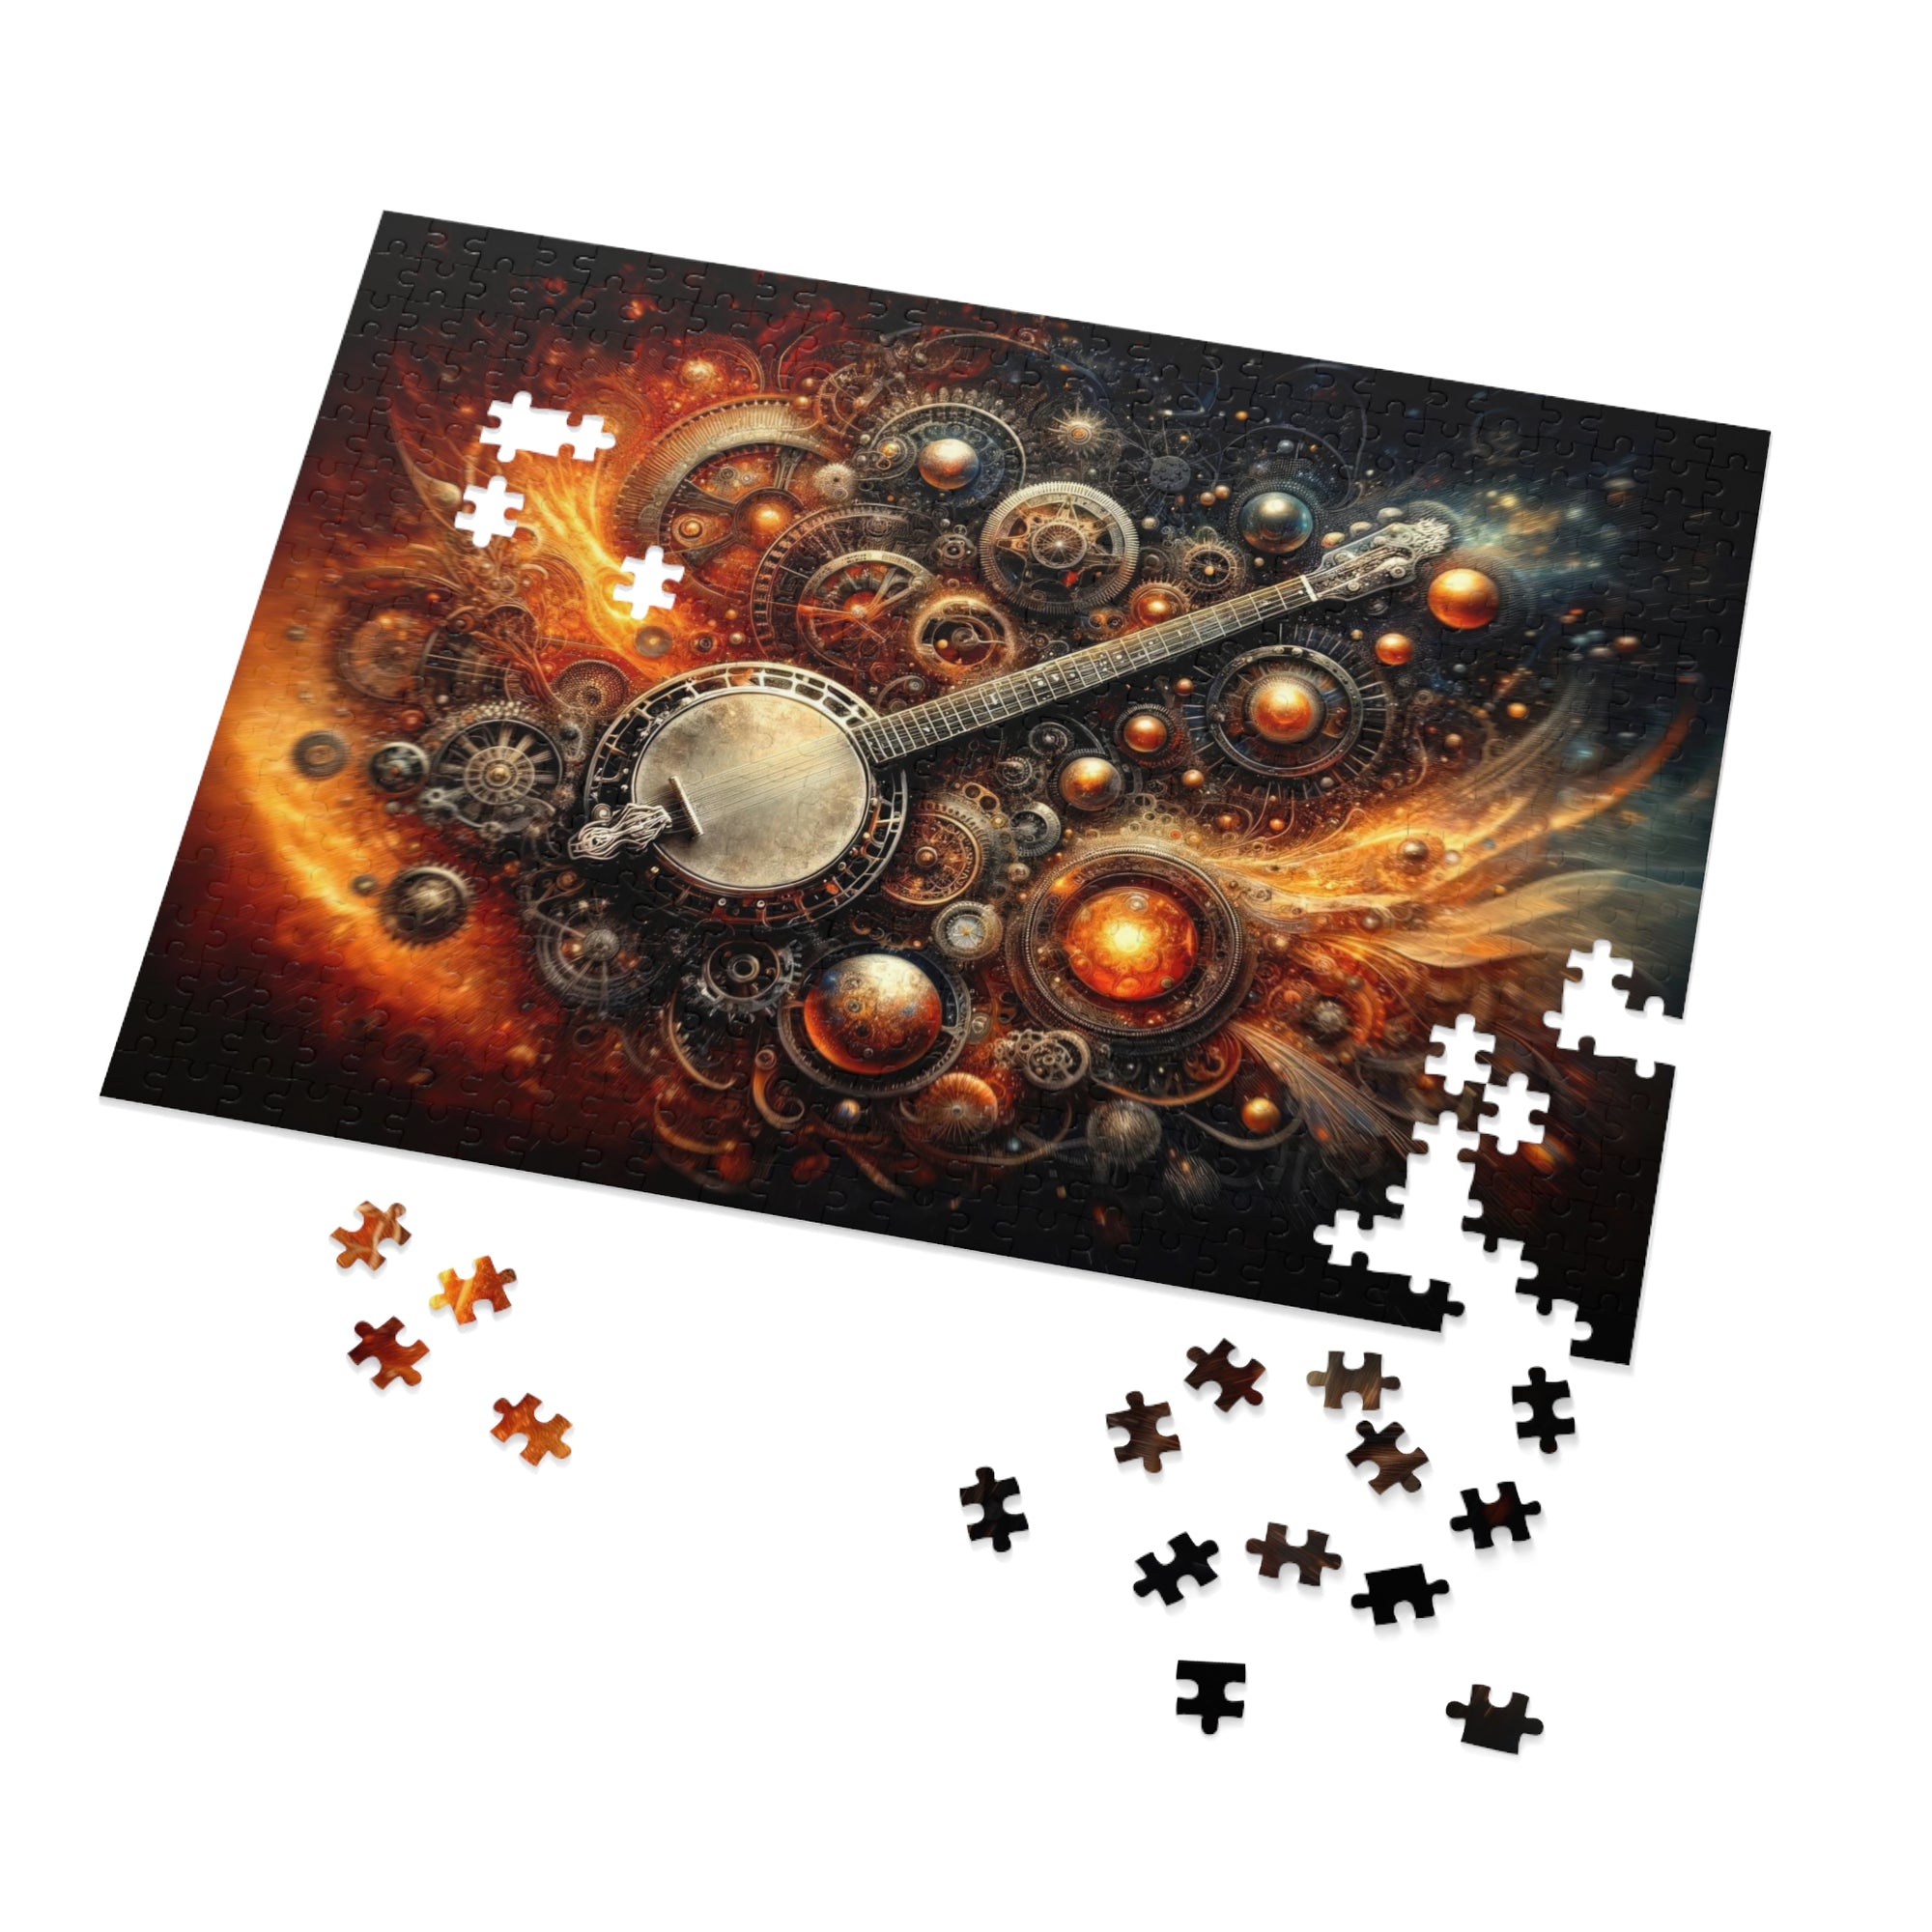 An Elegy of Cogs and Chords Jigsaw Puzzle